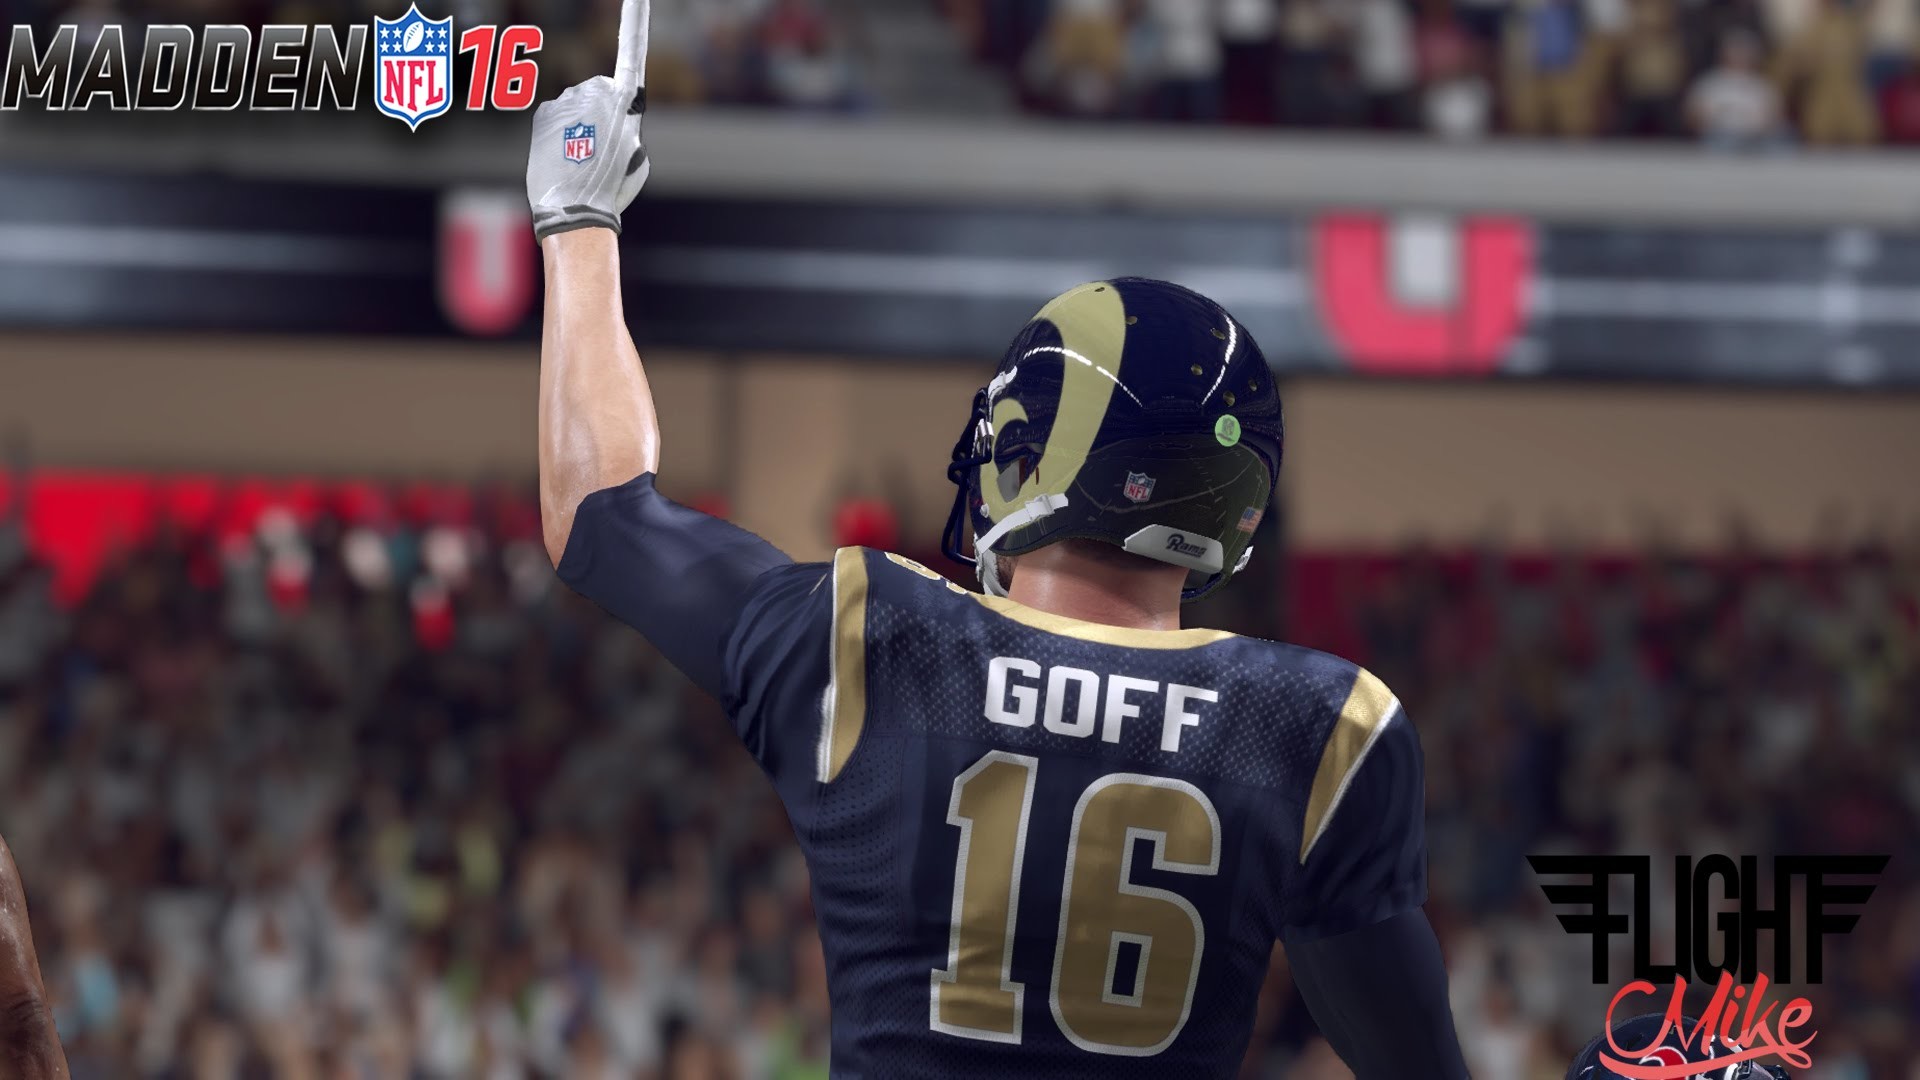 1920x1080 2016 #1 DRAFT PICK JARED GOFF DEBUTS FOR LOS ANGELES RAMS - MADDEN 16  ULTIMATE TEAM GAMEPLAY #84 - YouTube